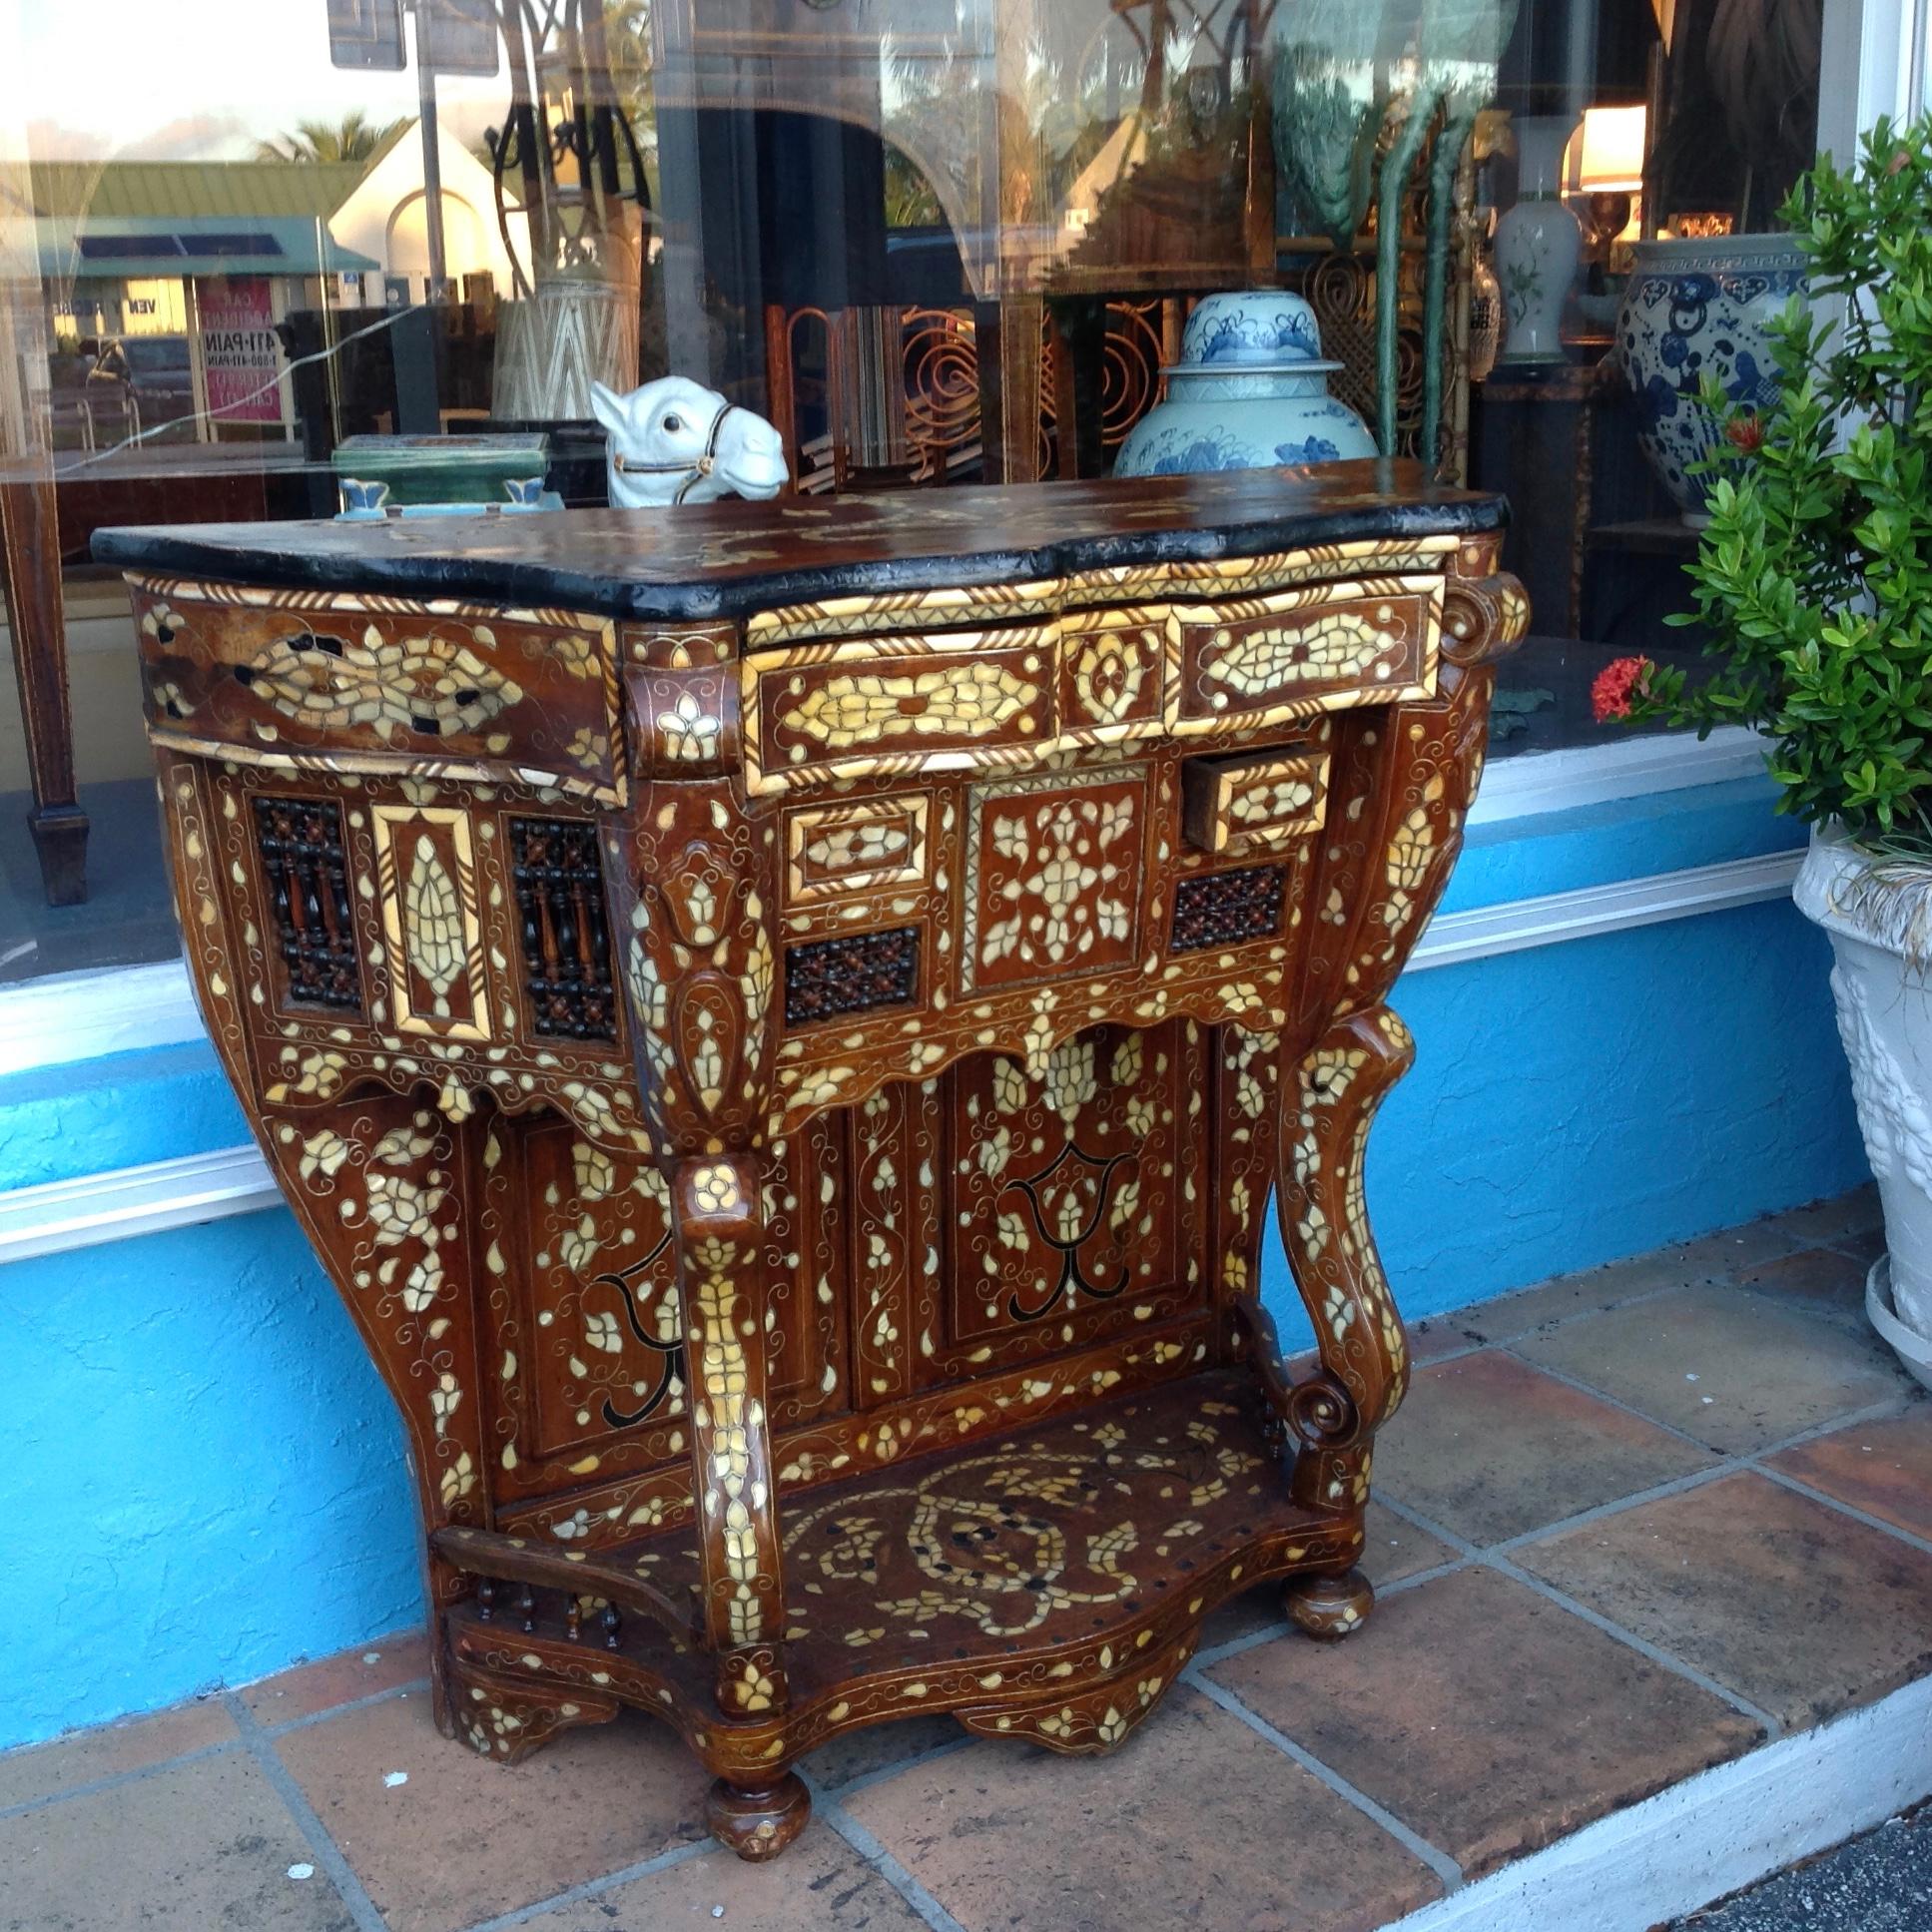 Dramatic style and flair to this ornately inlaid and unusual console fitted with 
a large top drawer and 2 smaller drawers.
The open carving is ornate.